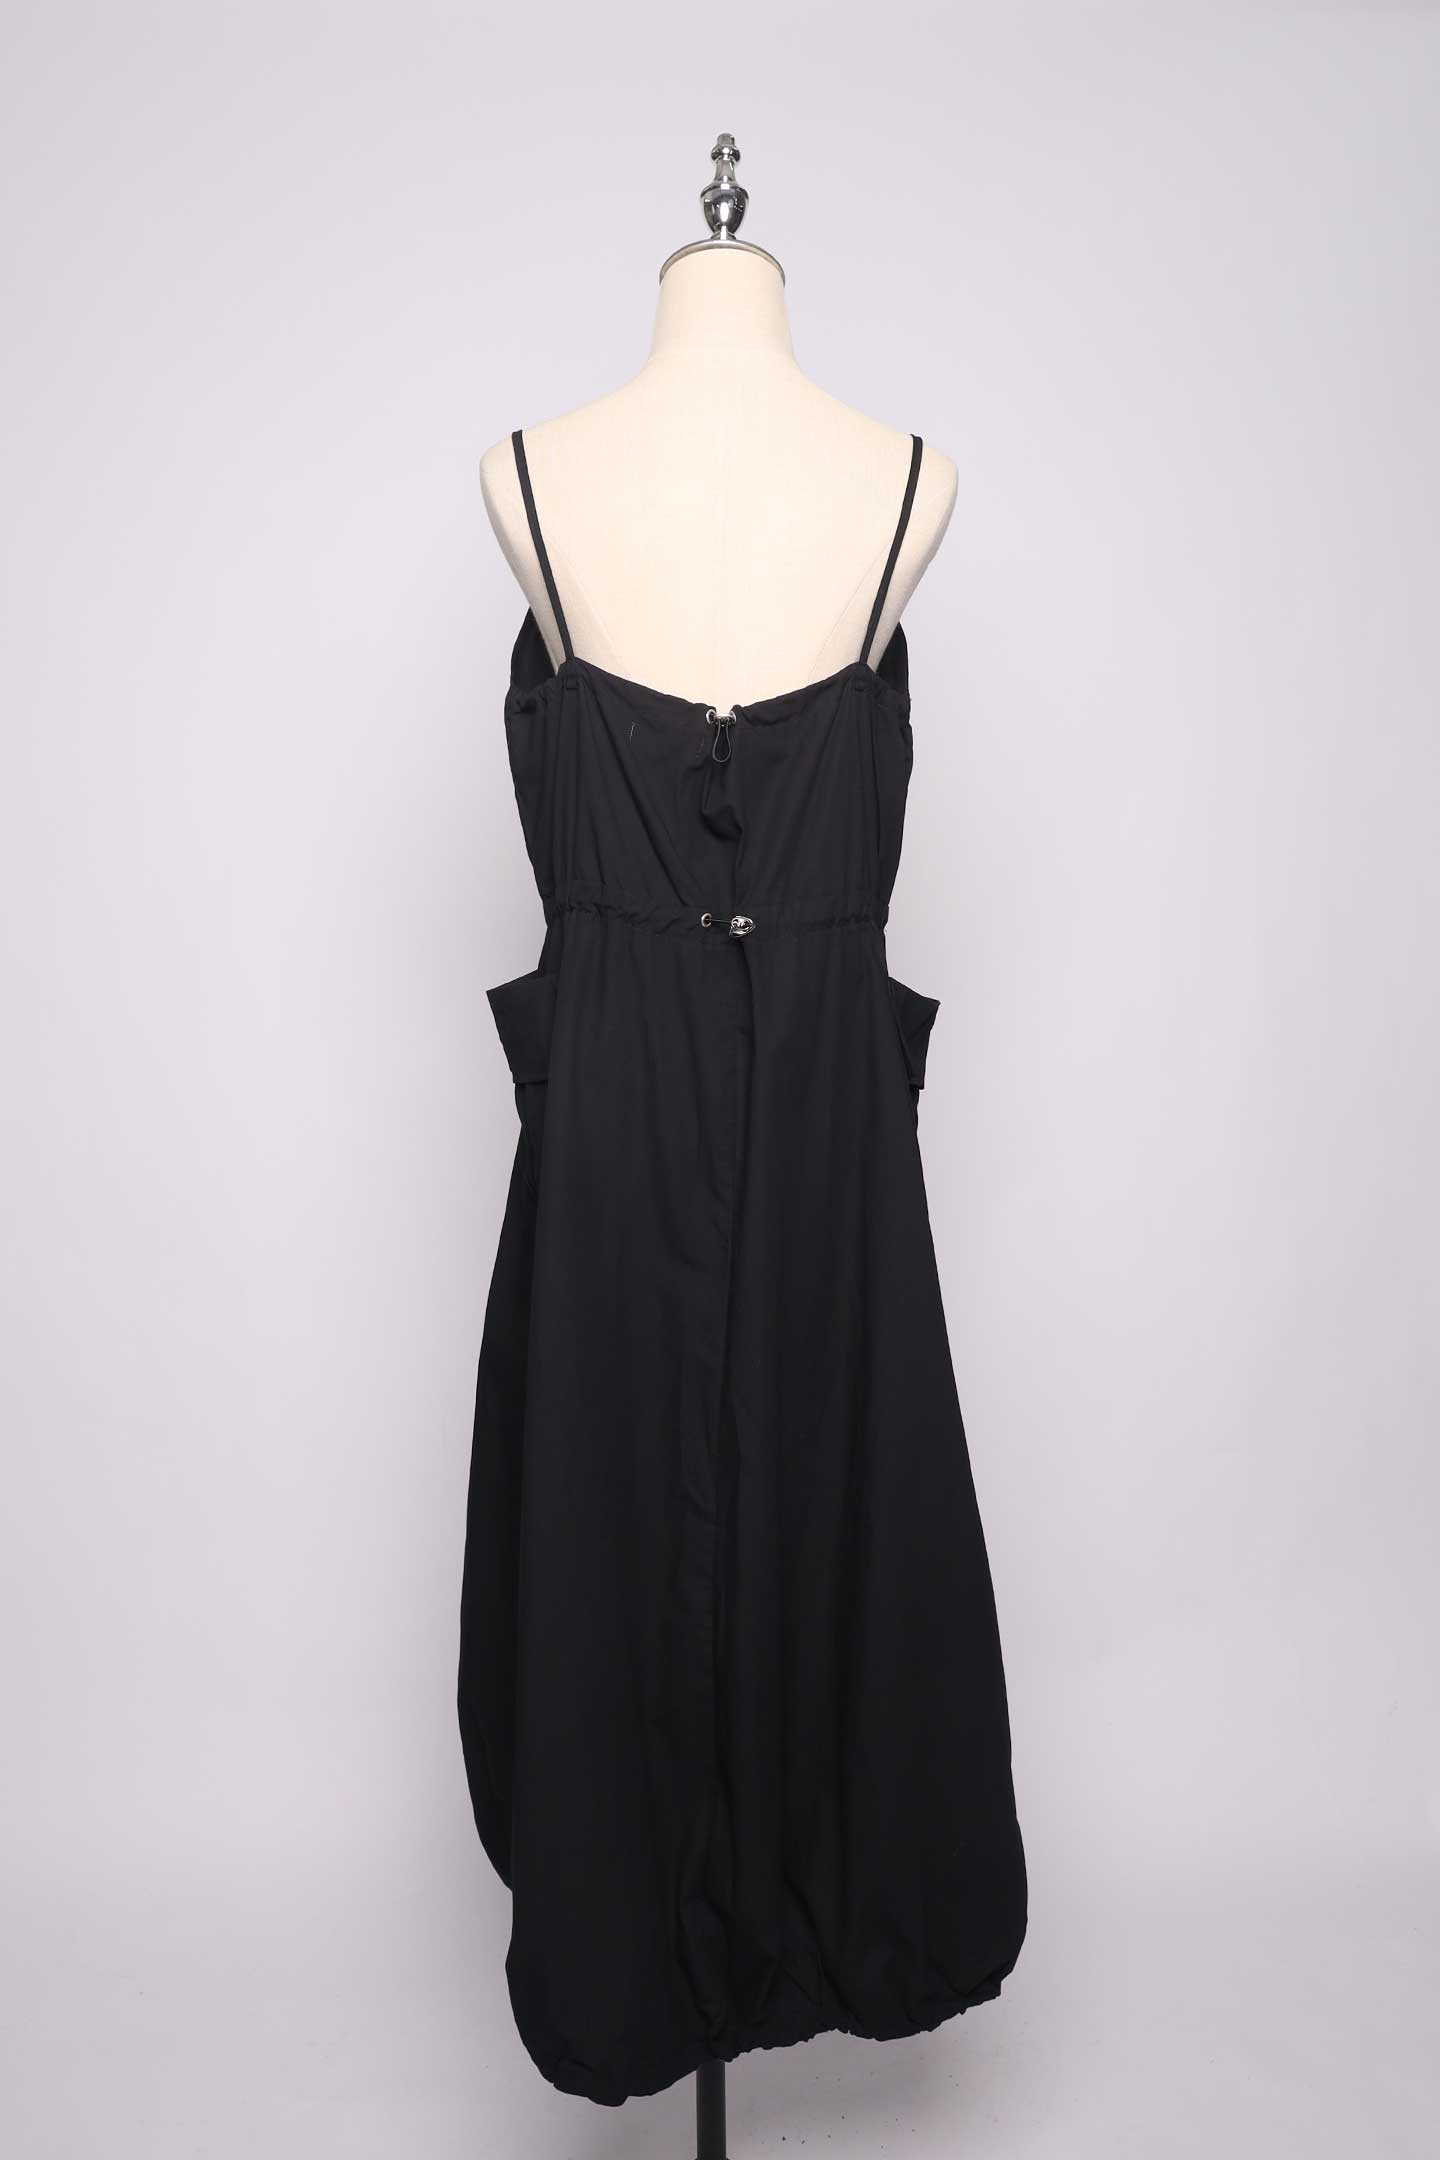 PO - Bailey Pinafore Dress in Black